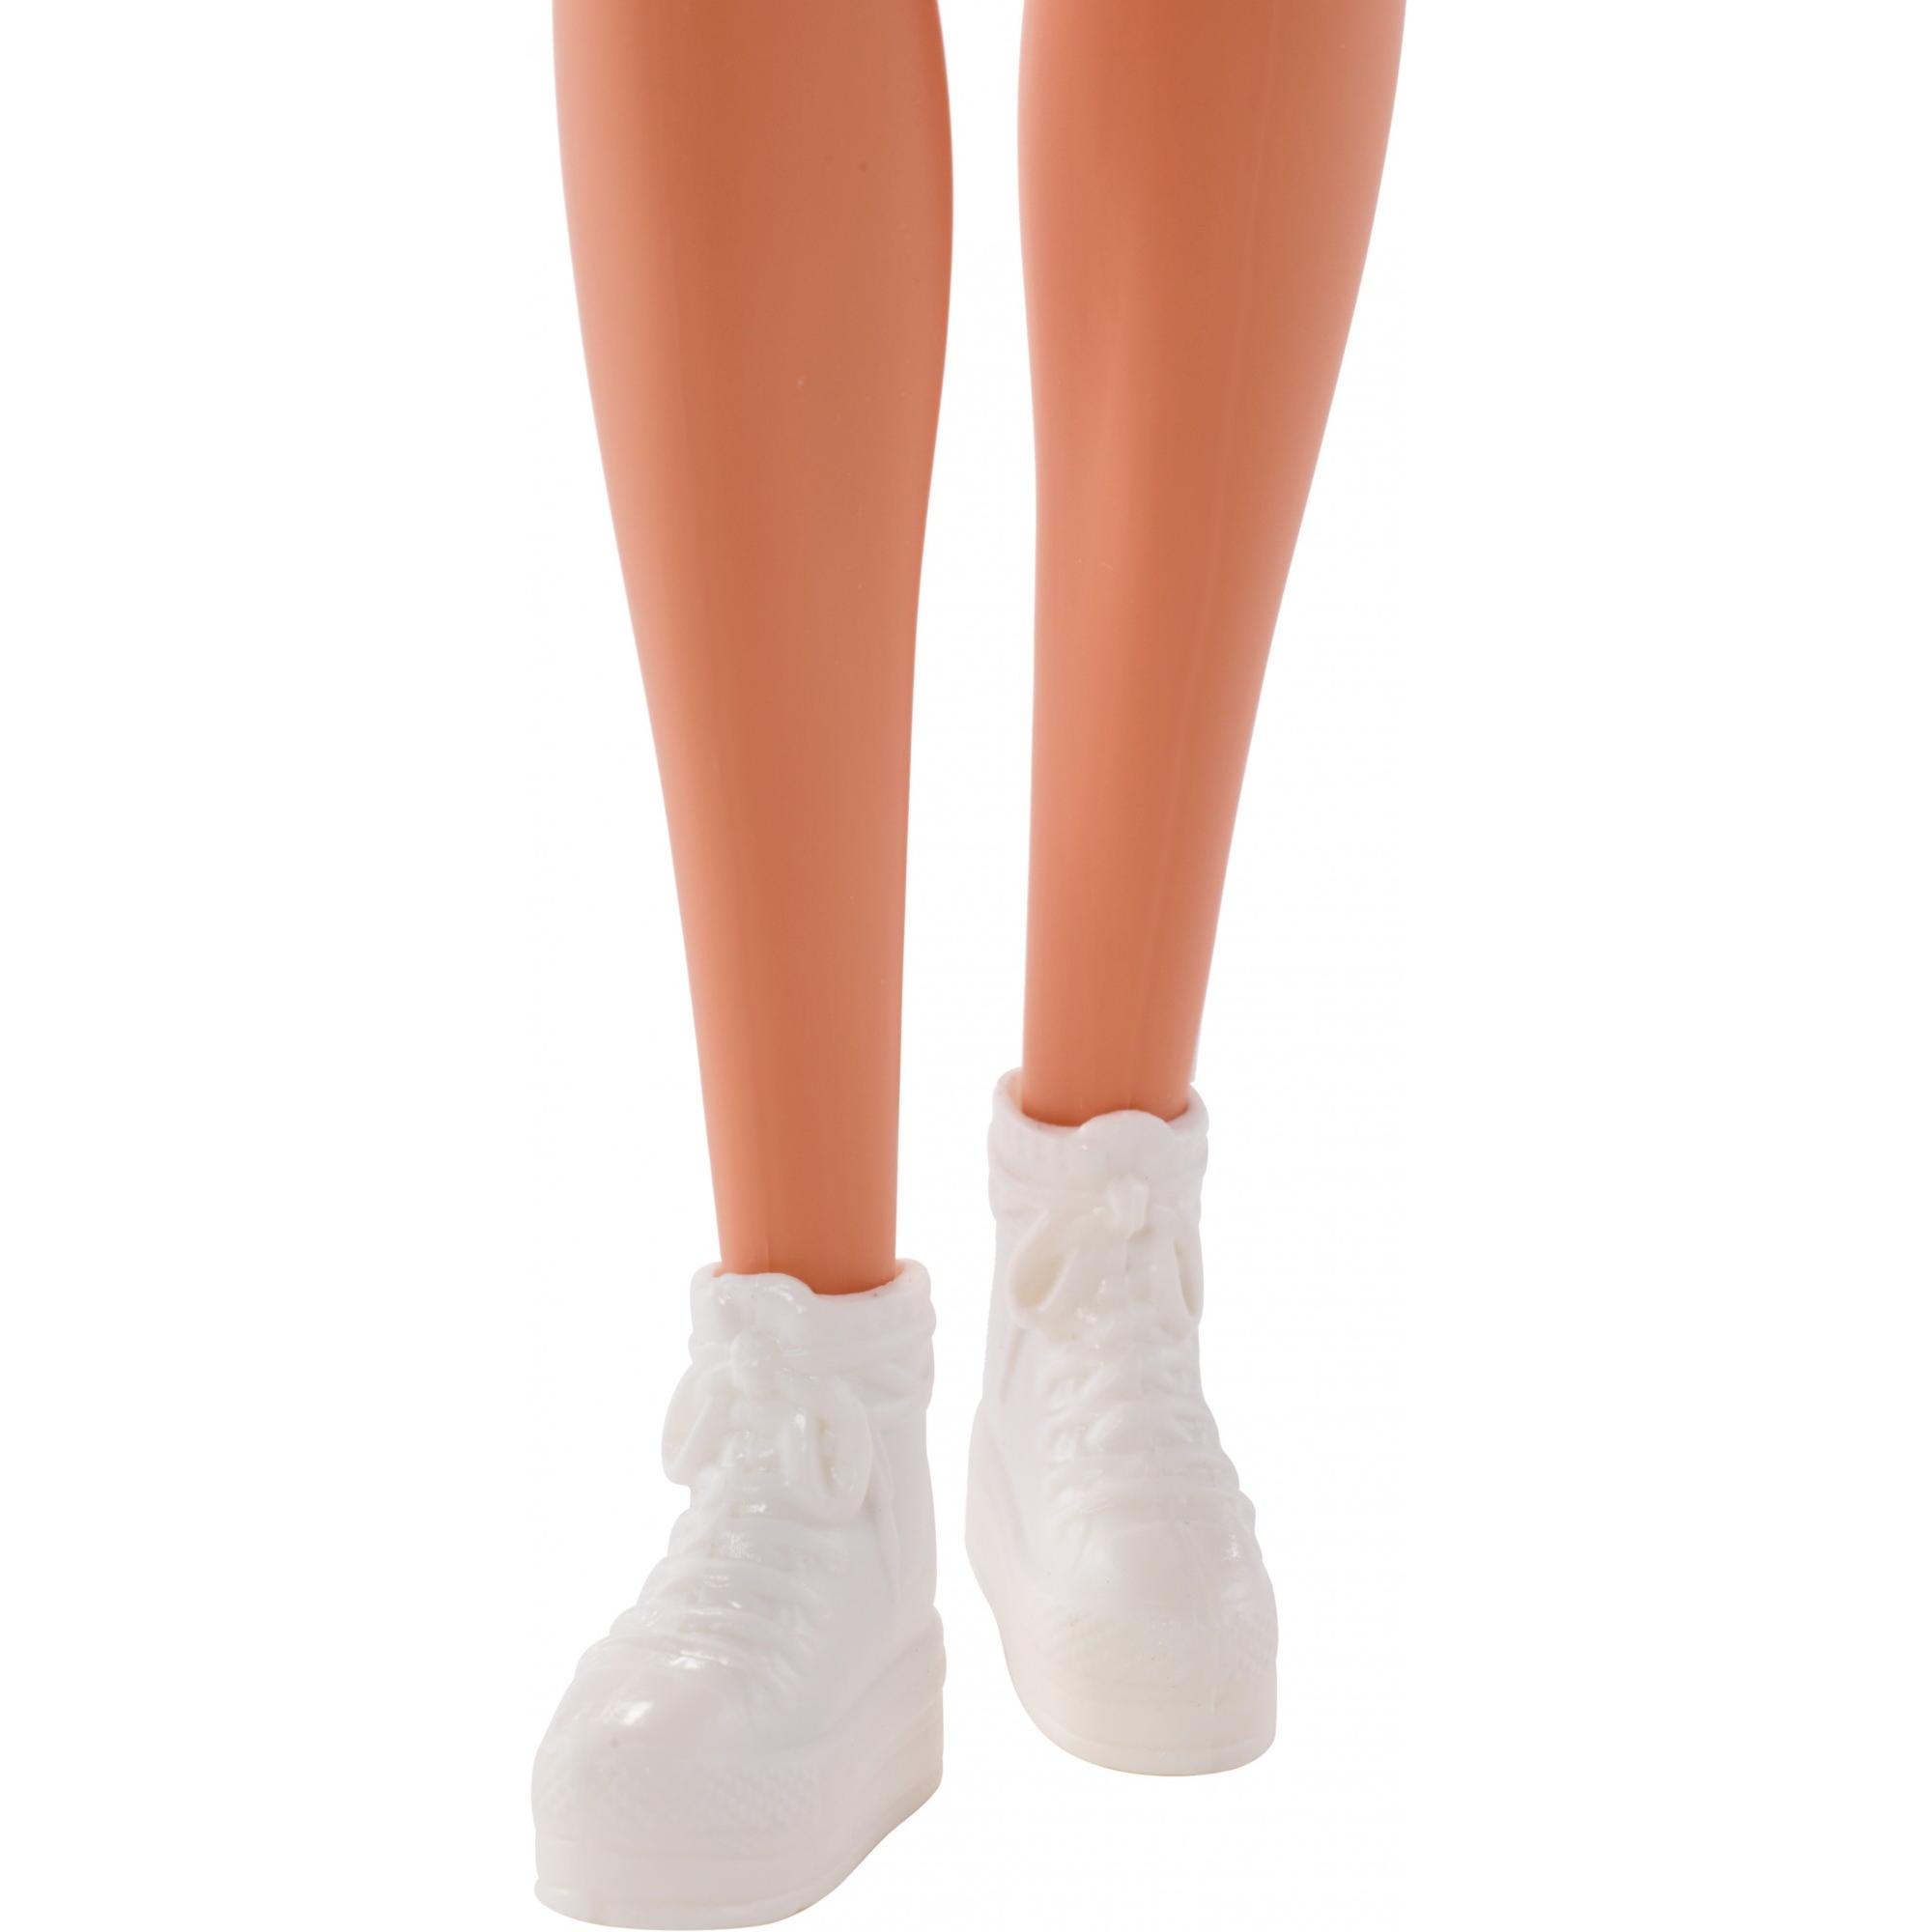 Barbie Fashion Orange Graphic Dress Doll with Blonde Hair - image 5 of 6